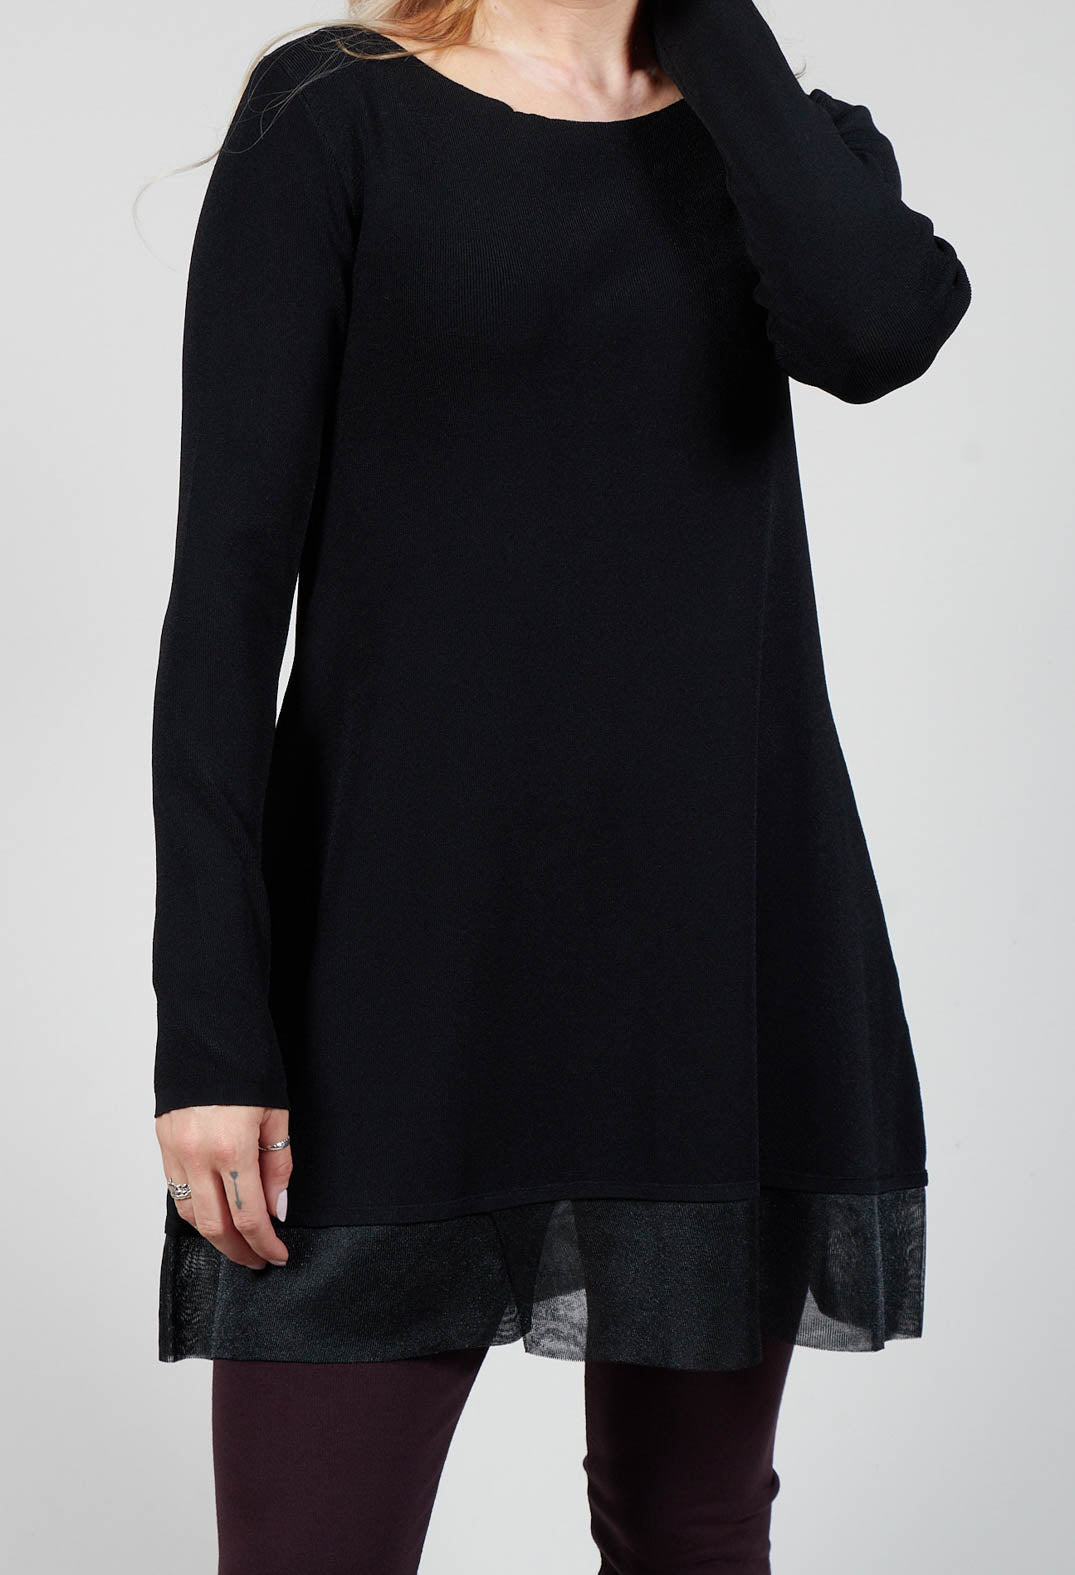 A-Line Tunic Style dress with Sheer Hem in Black